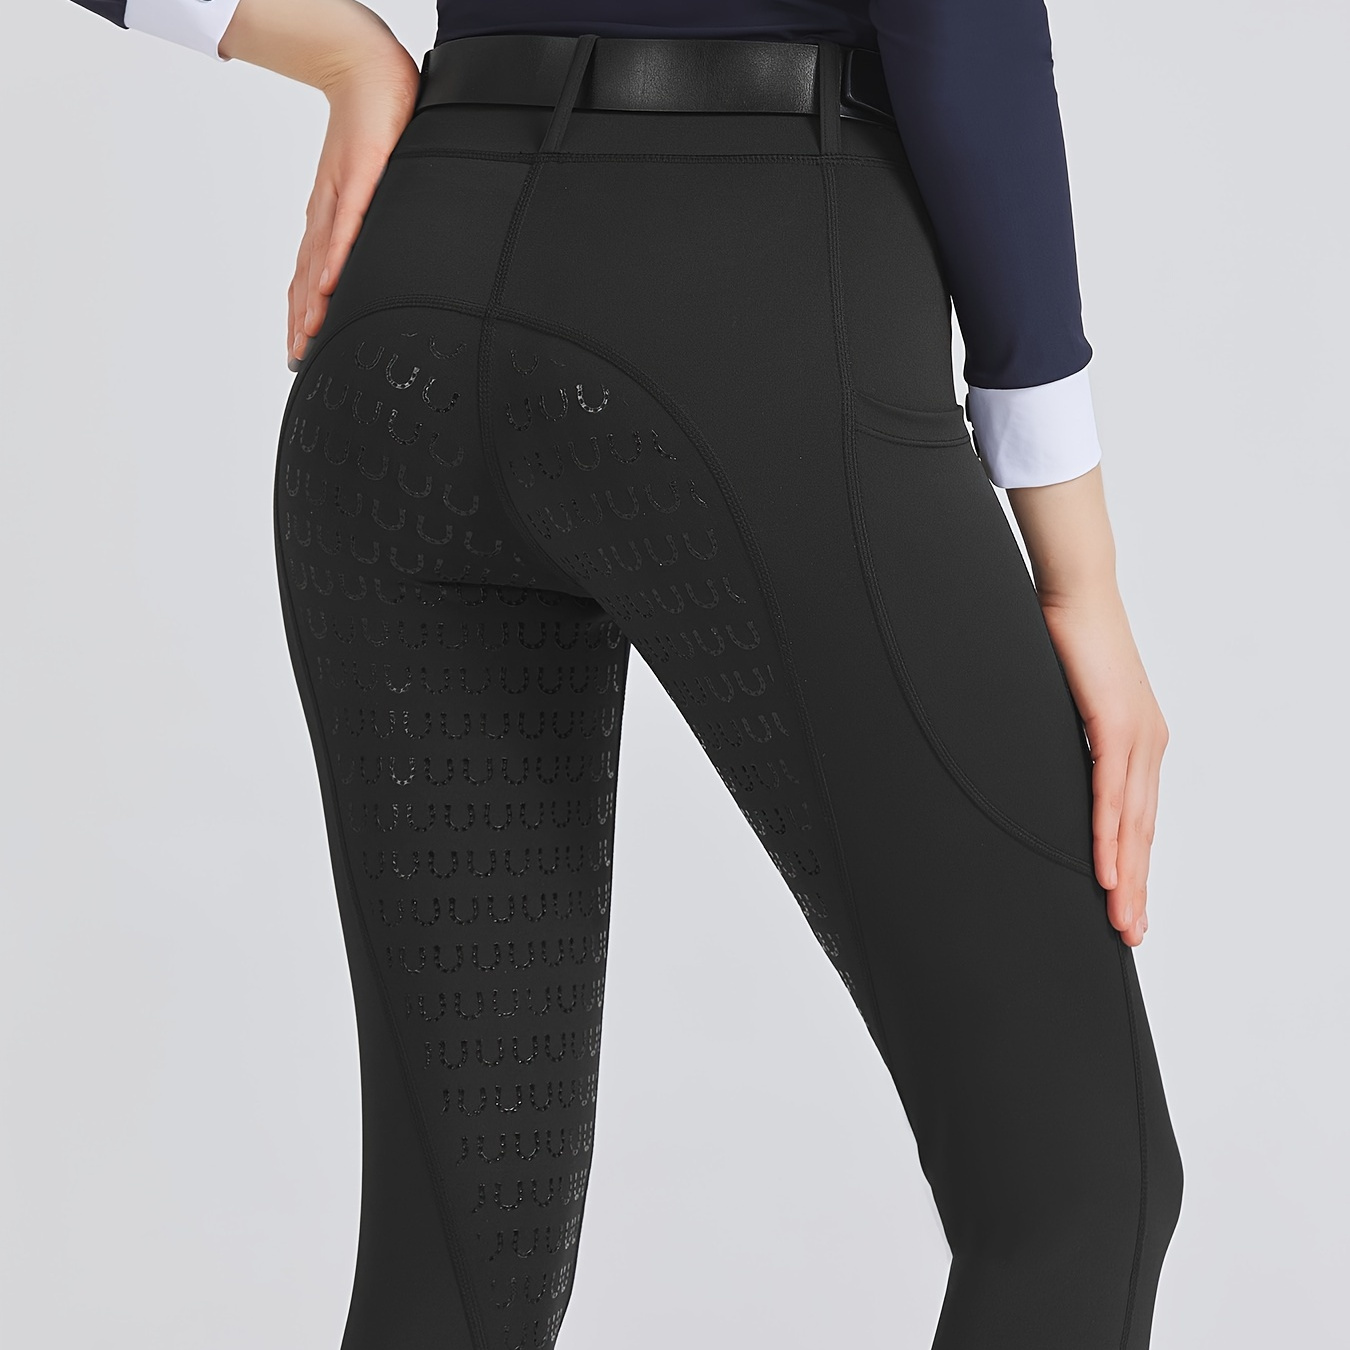 

High Elastic Slim Equestrian Pants, Riding Sports Pants For Women, Women's Activewear (without Belt)